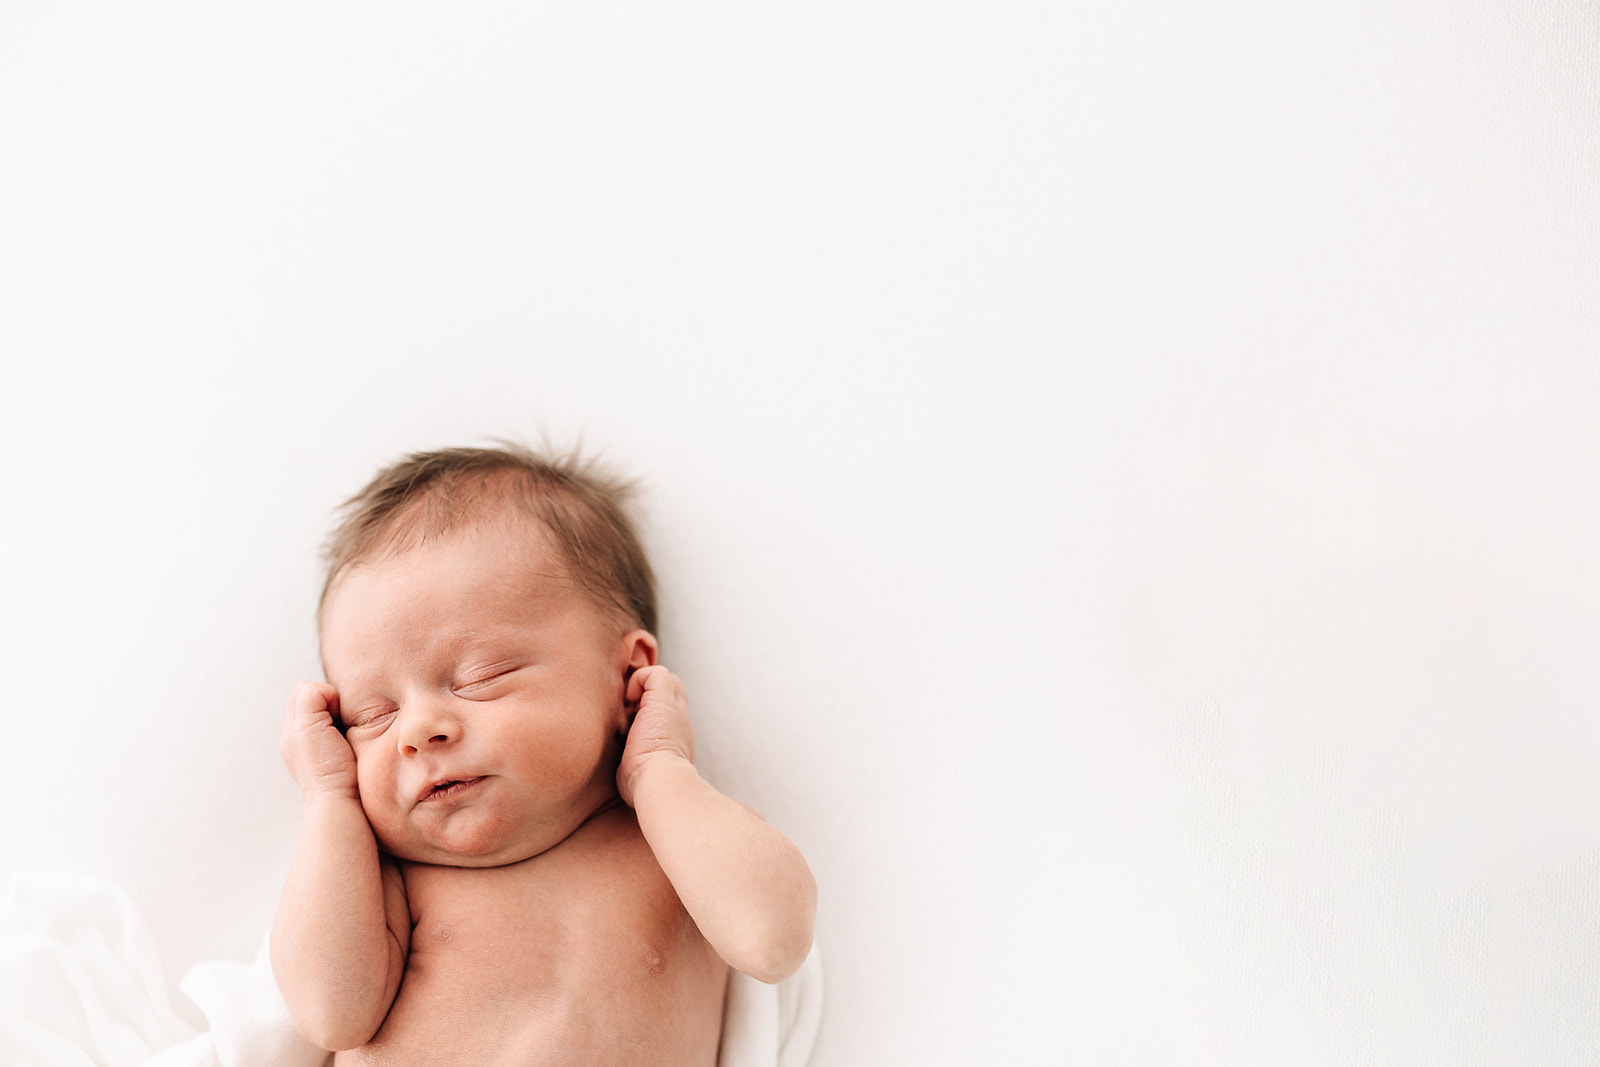 A newborn baby wiggles in its sleep on a white bed with hands up